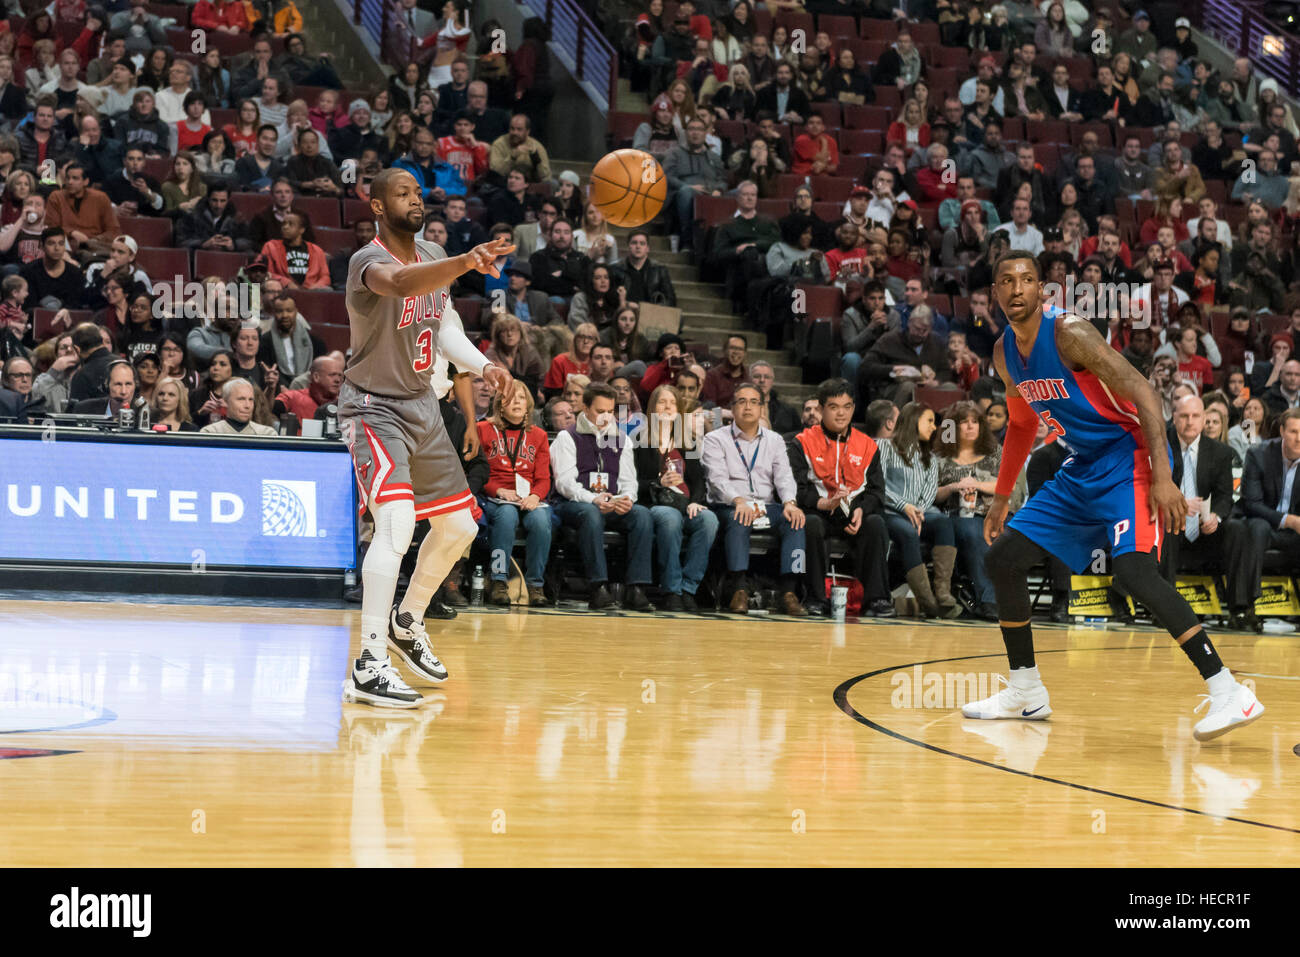 Chicago, USA.  19 December 2016. Bulls guard (#3), Dwyane Wade, makes a pass watched by Pistons guard (#5), Kentavious Caldwell-Pope, during the Chicago Bulls vs Detroit Pistons game at the United Center in Chicago. Final score - Detroit Pistons 82, Chicago Bulls 113.  © Stephen Chung / Alamy Live News Stock Photo